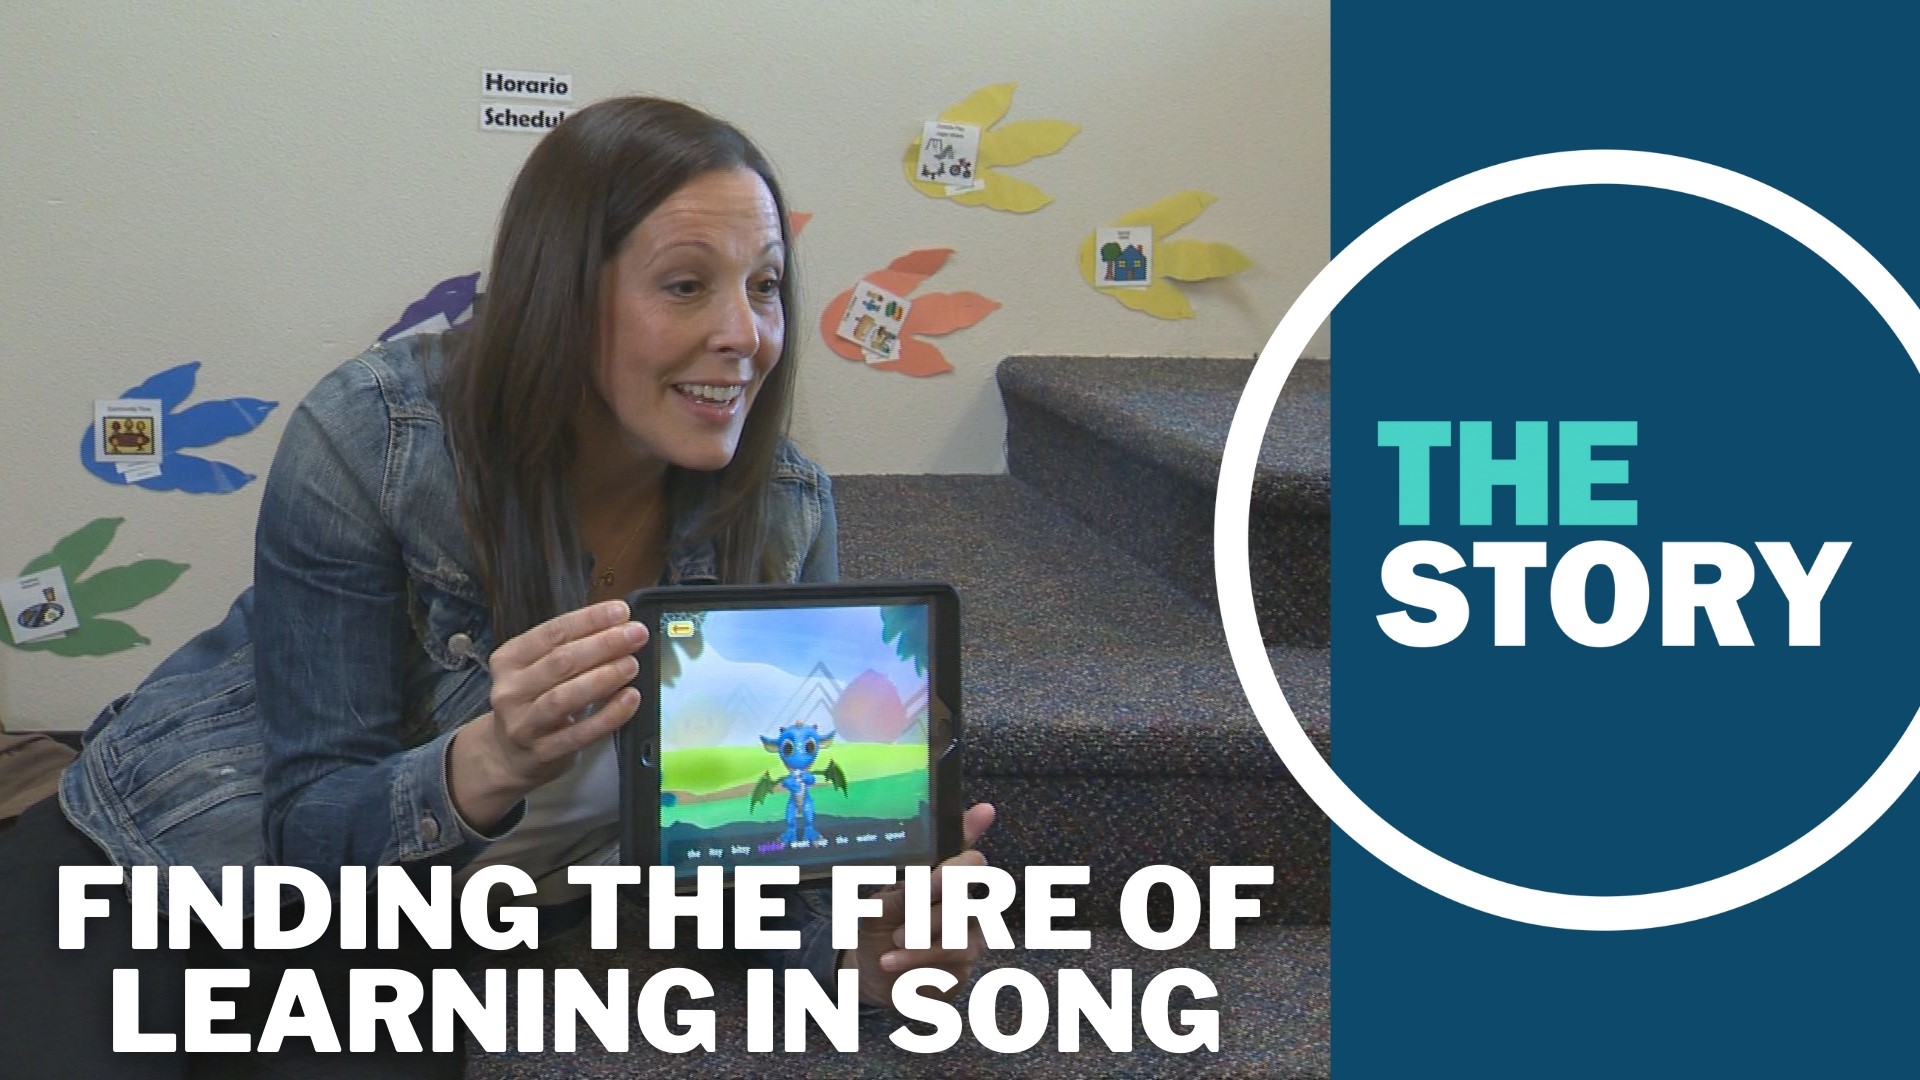 As a special education teacher, Emily Cadiz suffered a severe brain injury. Music helped her to re-learn what she'd lost, a gift she now shares with young kids.